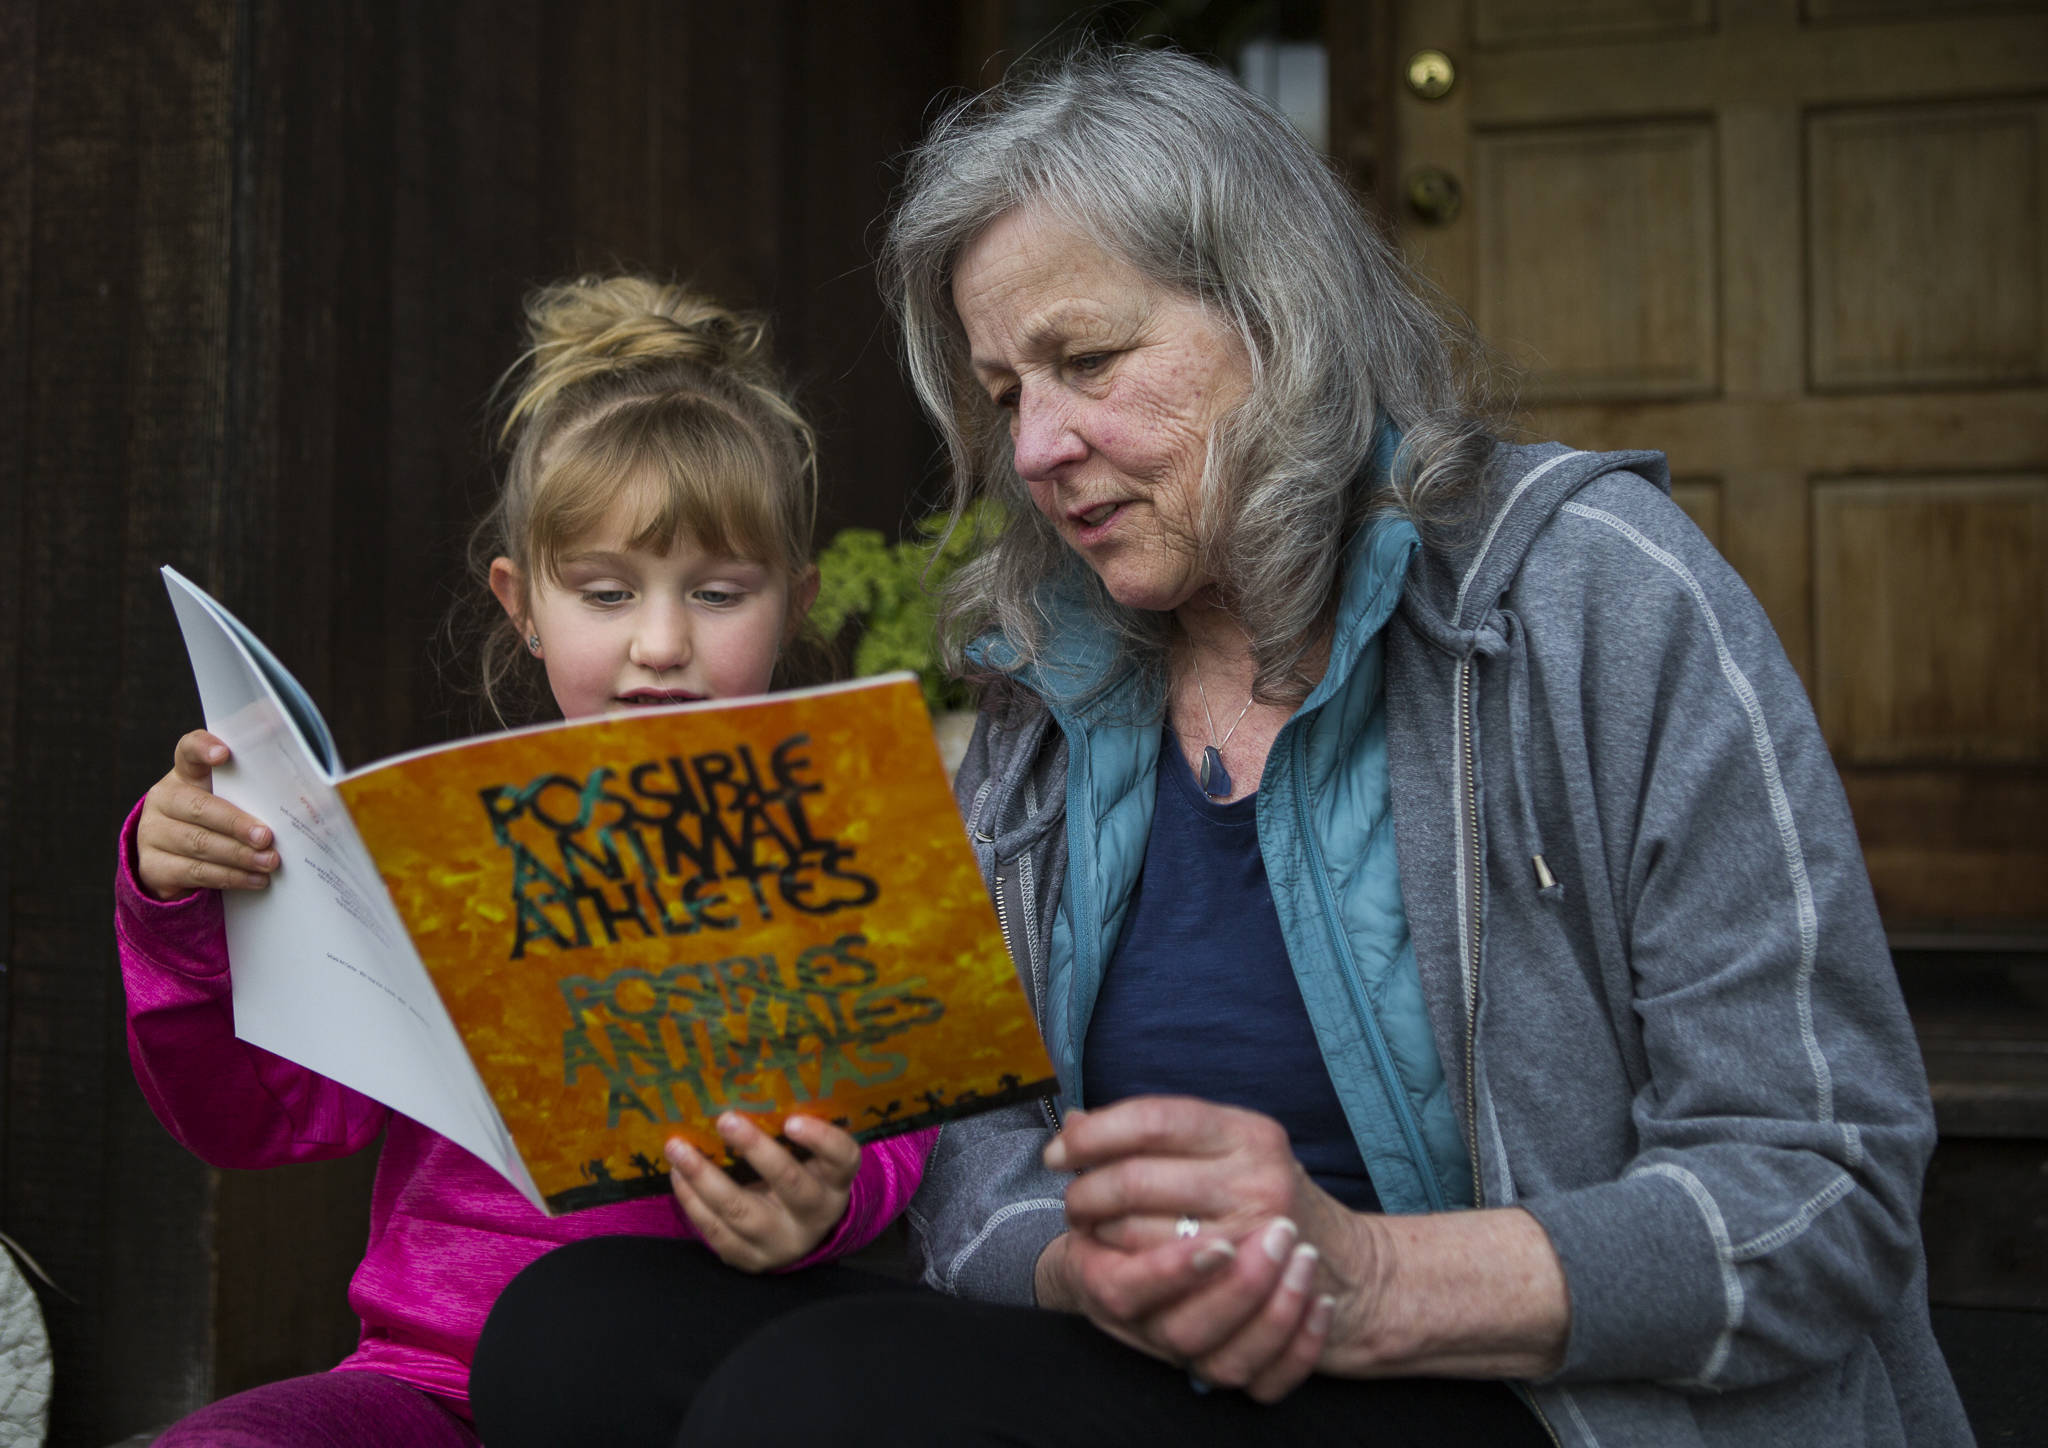 Henri Wilson, who helped create a children’s book with teens in Snohomish County Juvenile Court’s detention alternatives and diversion programs, flips through “Possible Animal Athletes” with her granddaughter, Alexa Estes, 5, on April 27 in Everett. (Olivia Vanni / The Herald)